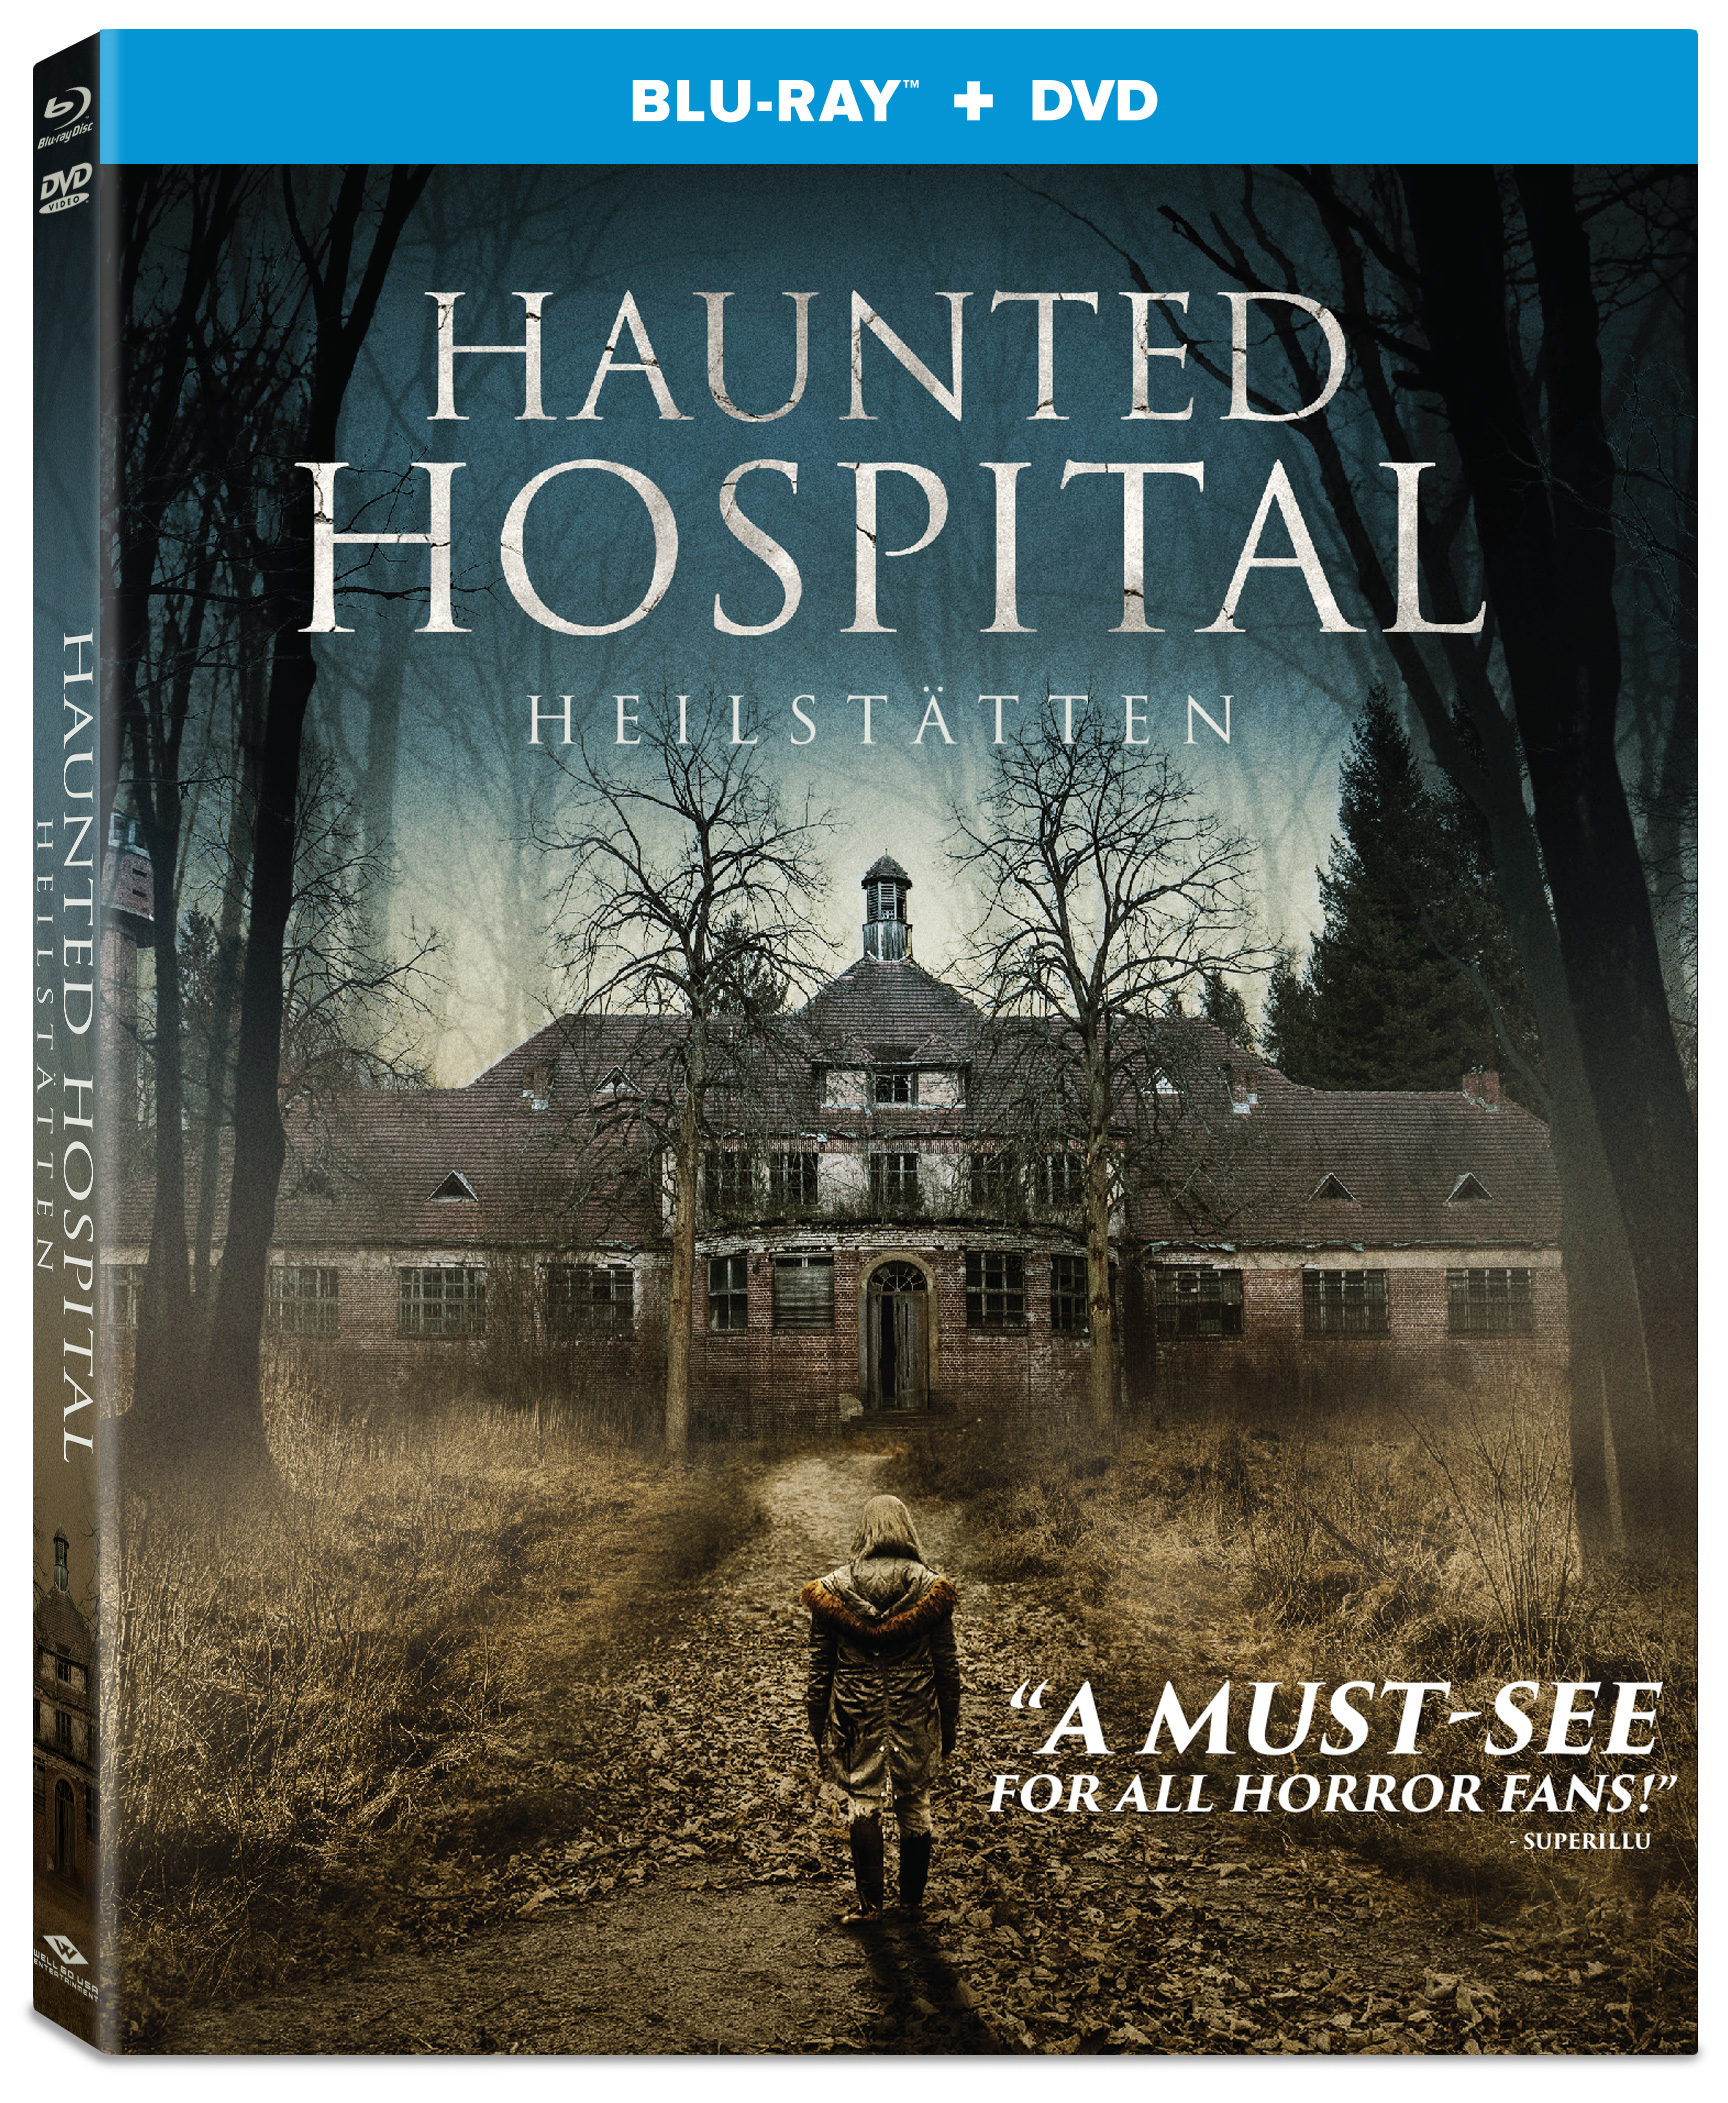 Haunted Hospital Heilstatten Blu-Ray cover (Well Go USA)